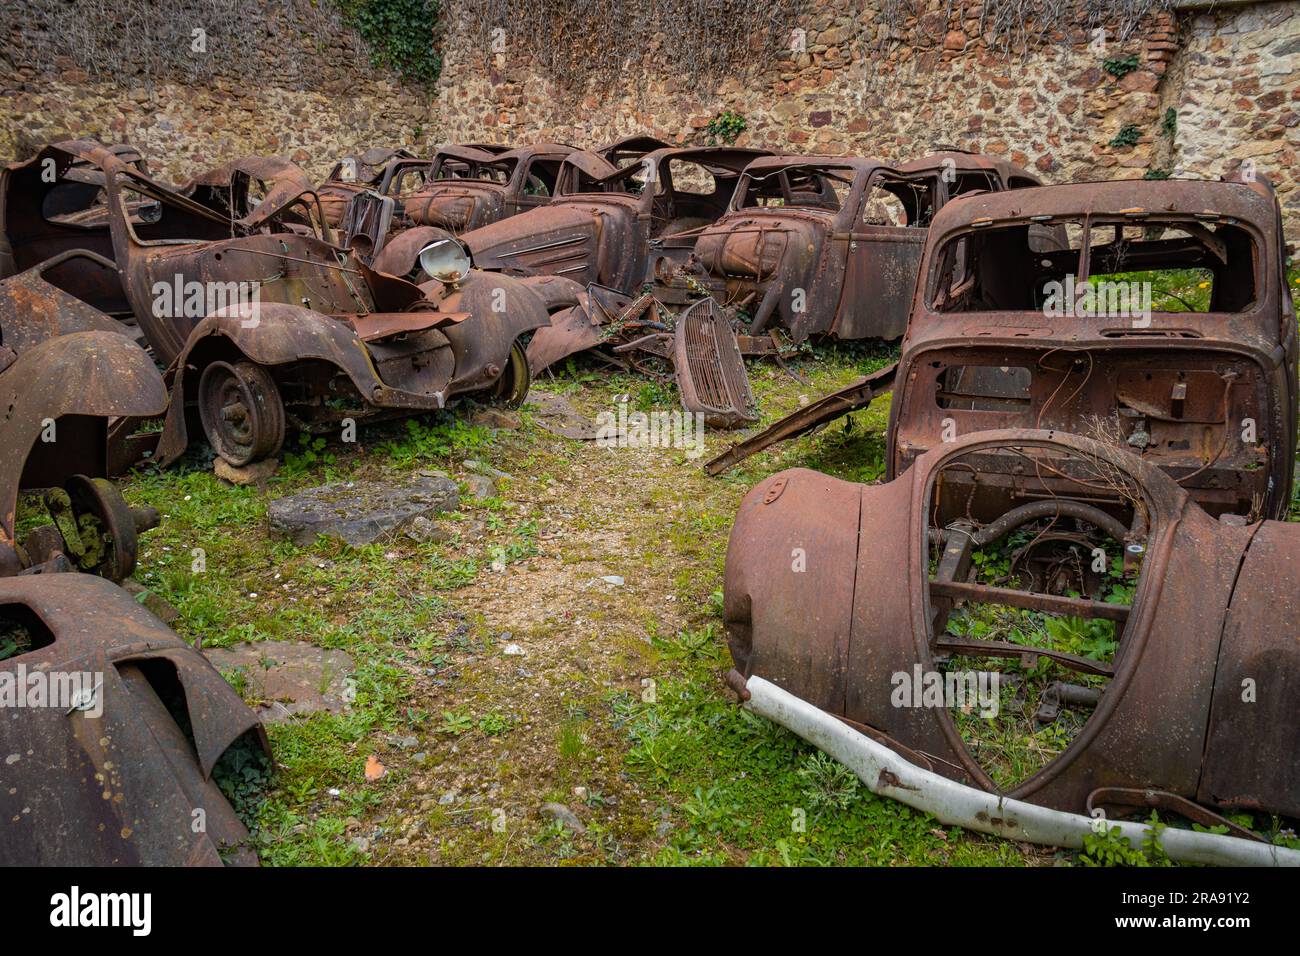 Abandoned scrapyard with old rusty cars in the destroyed village of Oradour sur Glane in France Stock Photo